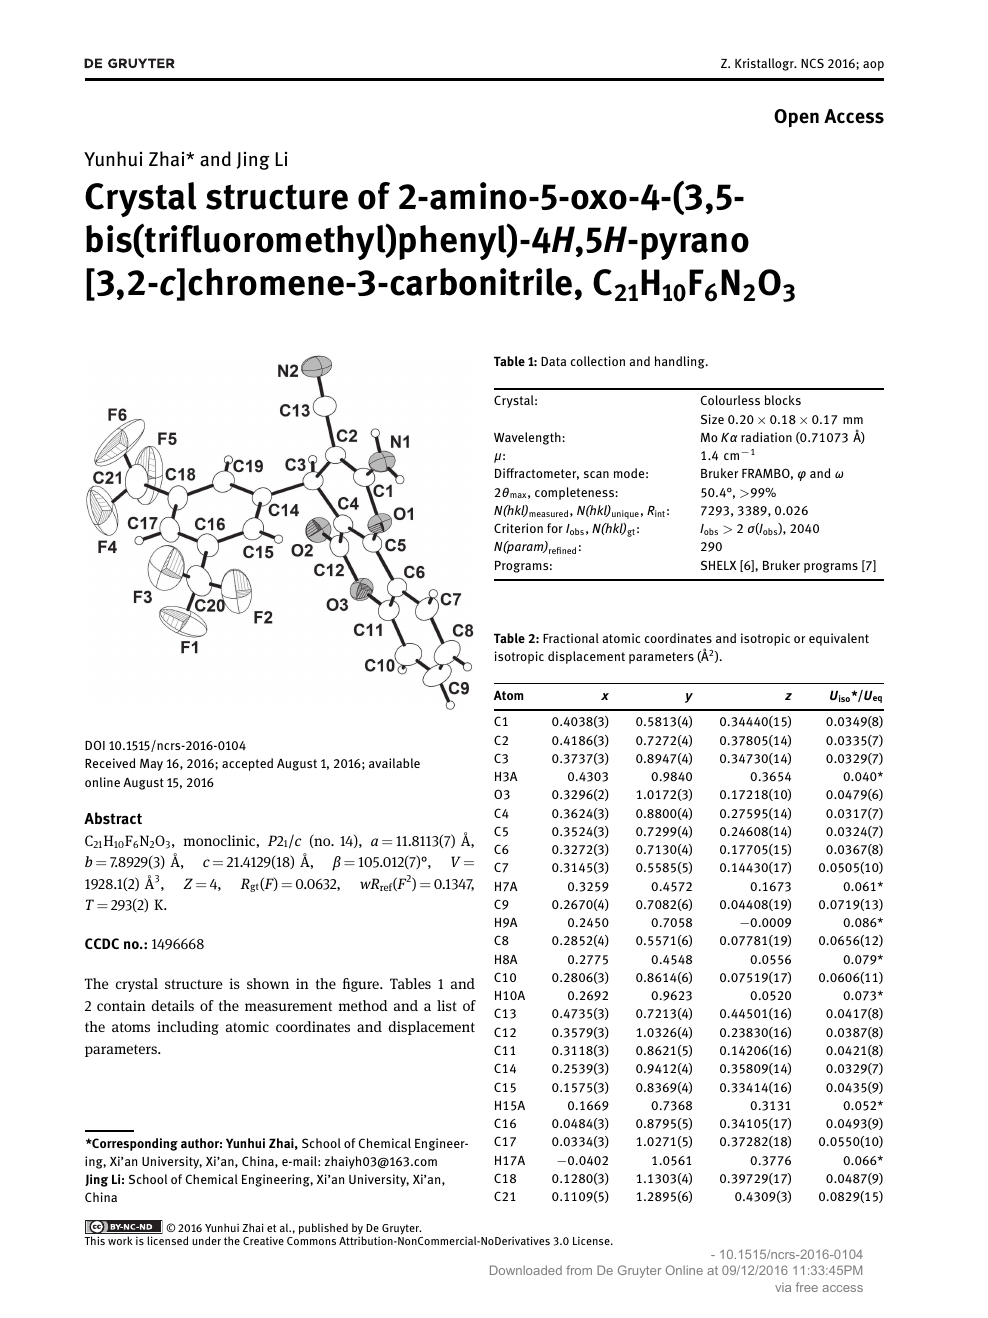 Crystal Structure Of 2 Amino 5 Oxo 4 3 5 Bis Trifluoromethyl Phenyl 4h 5h Pyrano 3 2 C Chromene 3 Carbonitrile C21h10f6n2o3 Topic Of Research Paper In Chemical Sciences Download Scholarly Article Pdf And Read For Free On Cyberleninka Open